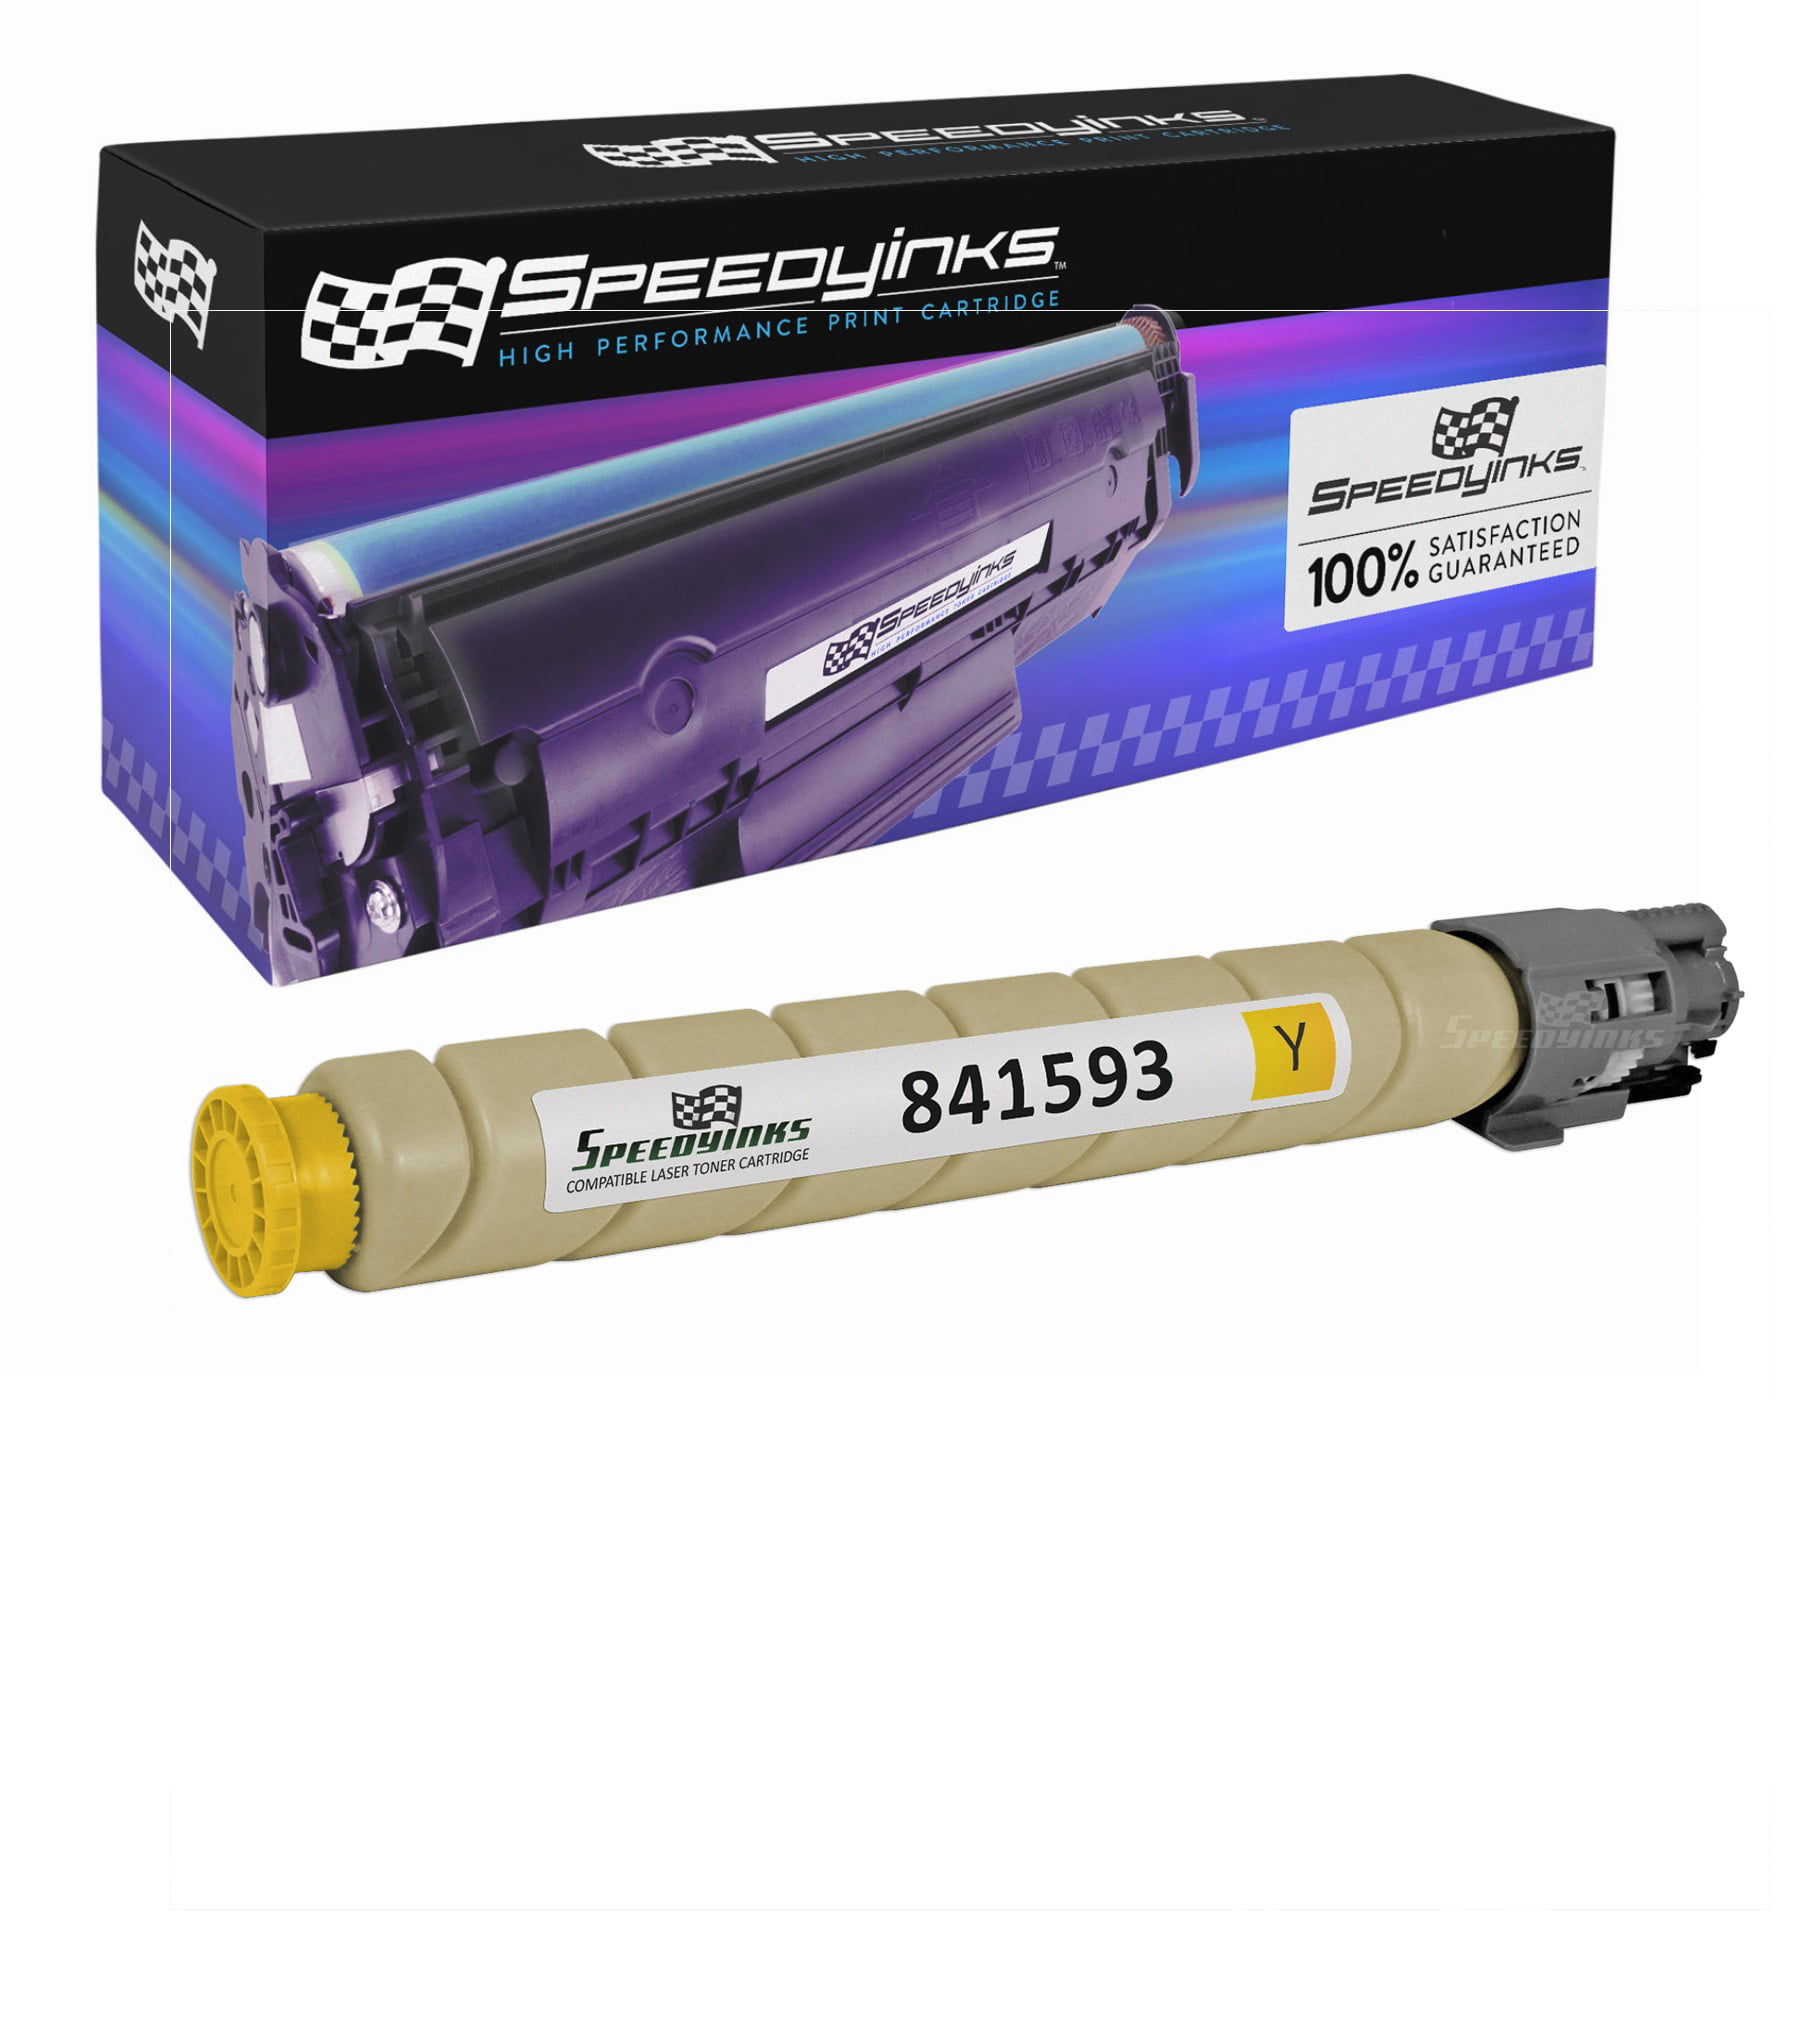 Compatible High Yield 408179 Laser Printer Toner Cartridge Used for Ricoh SP C360 C361 C360DNW C360SFNW Printer 2-Pack Yellow 